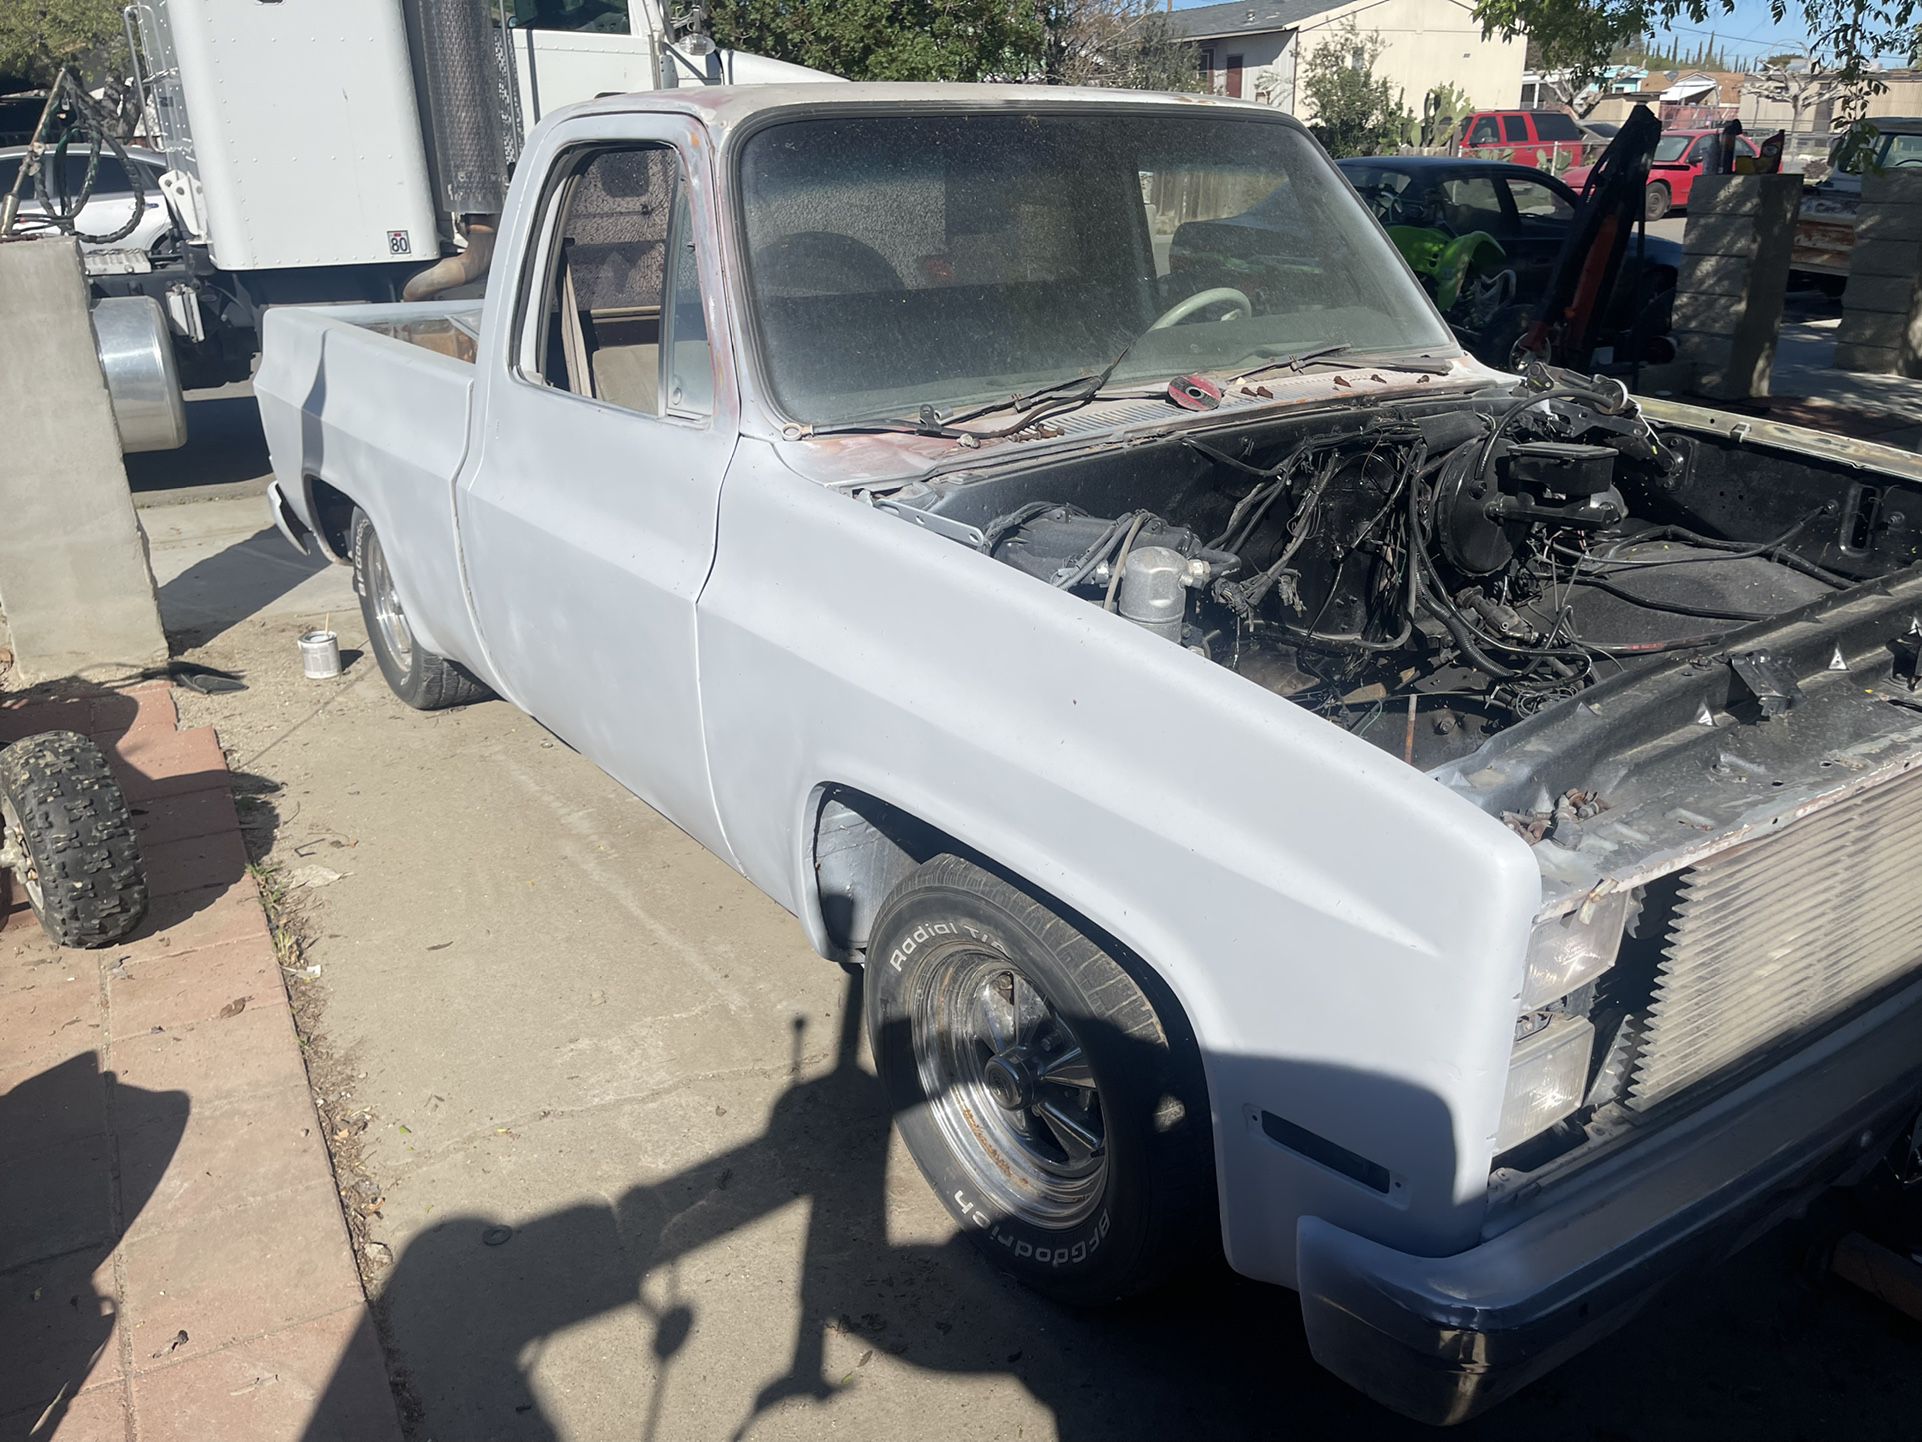 84 Chevy Shortbed